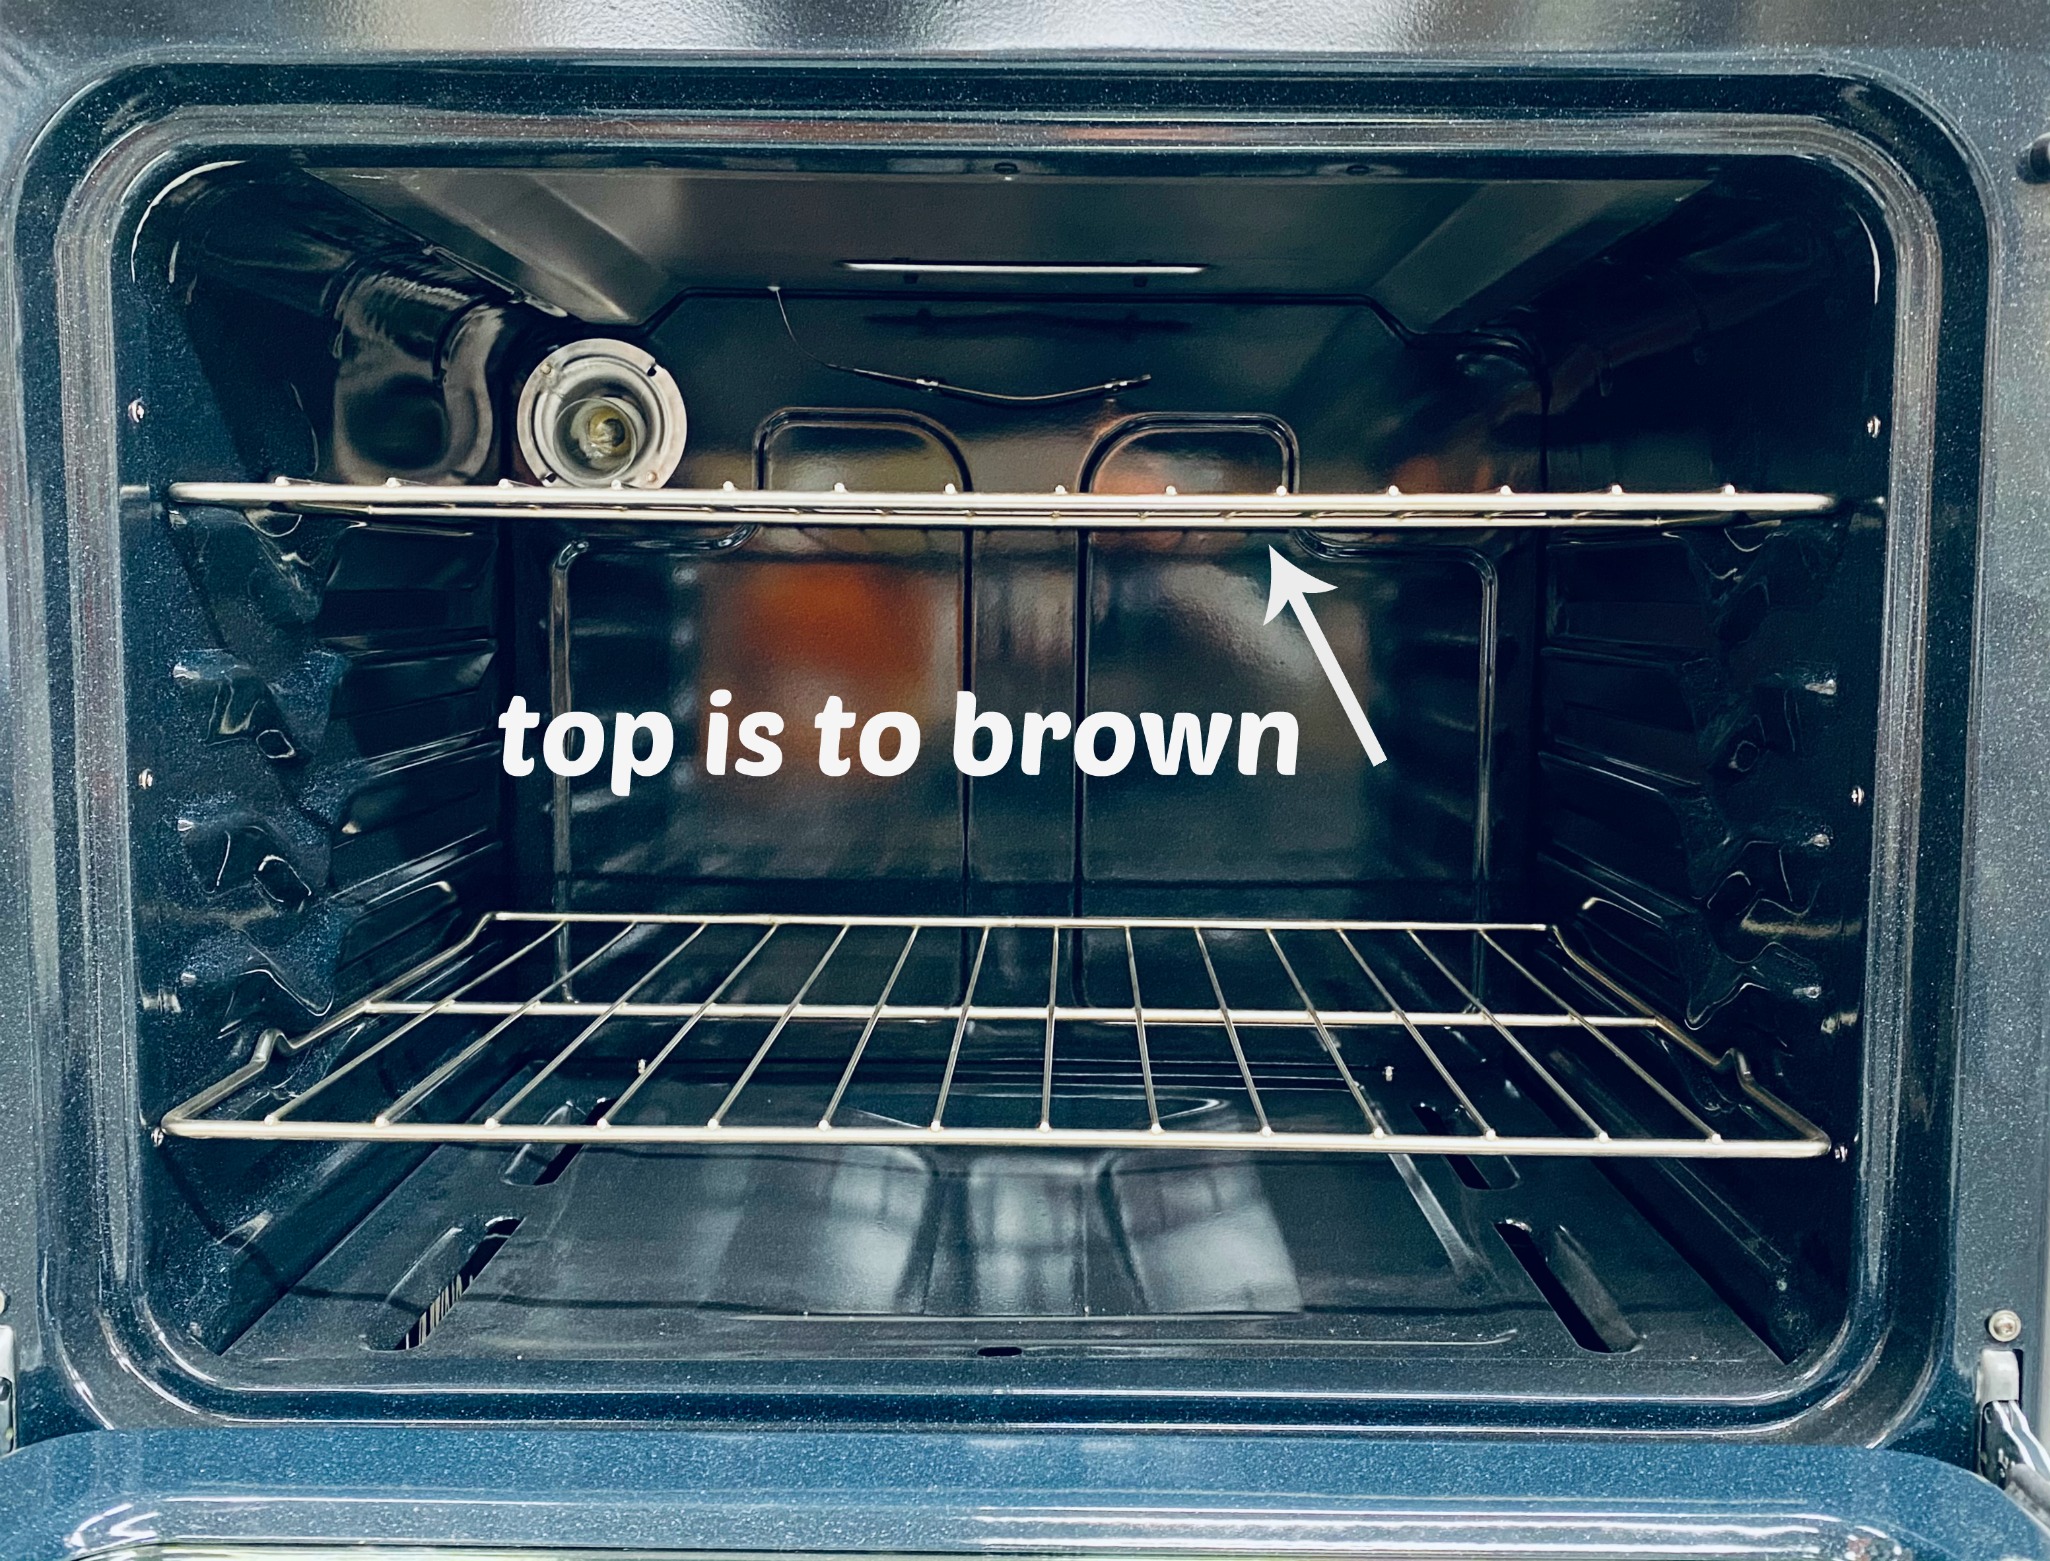 tips on knowing how the oven works